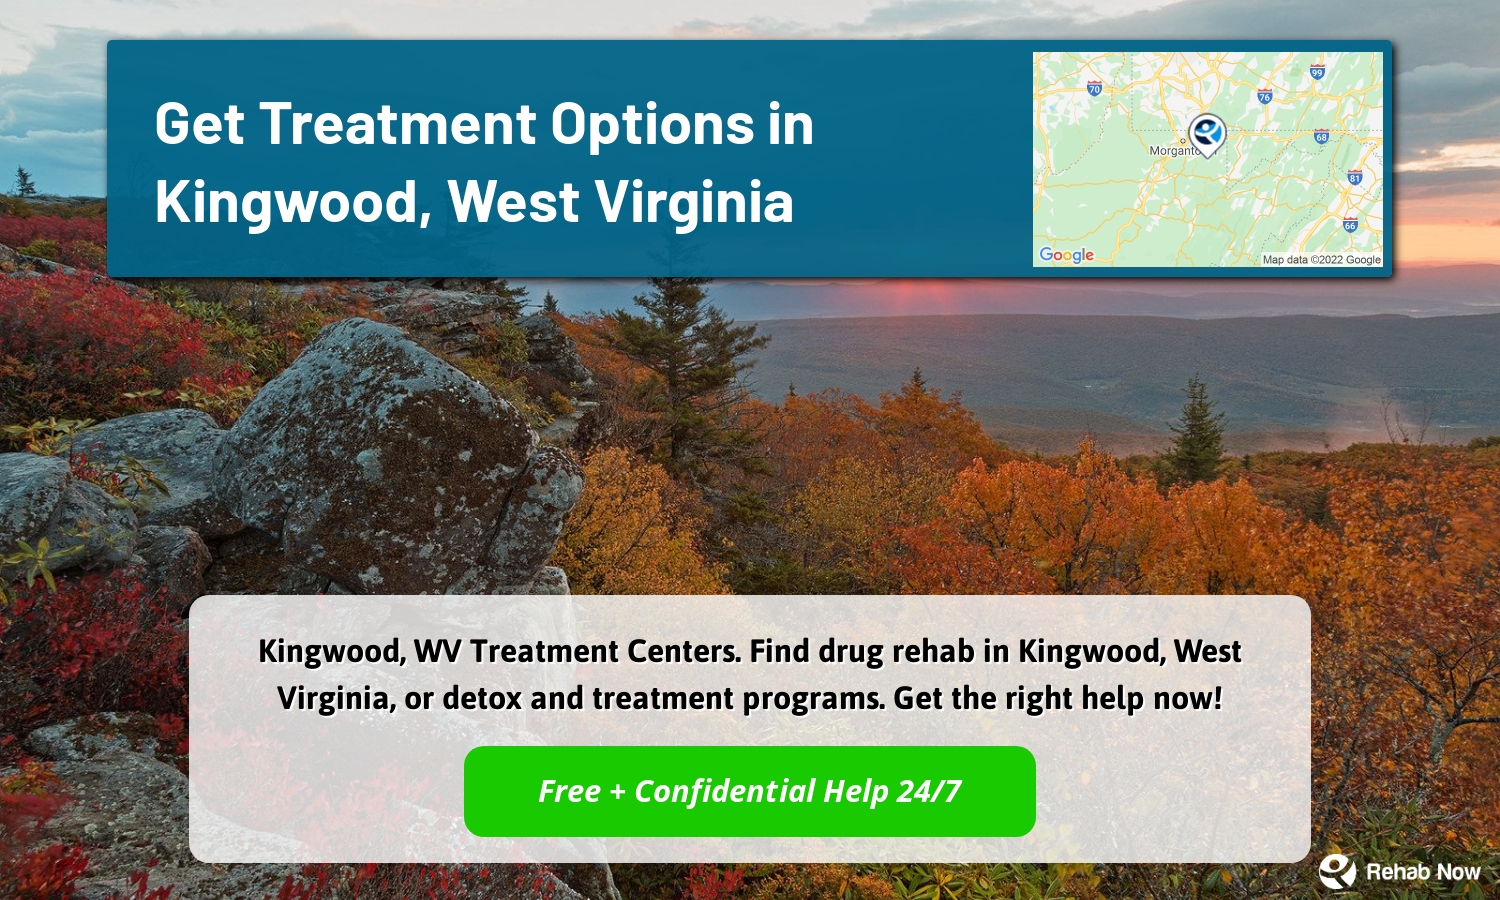 Kingwood, WV Treatment Centers. Find drug rehab in Kingwood, West Virginia, or detox and treatment programs. Get the right help now!